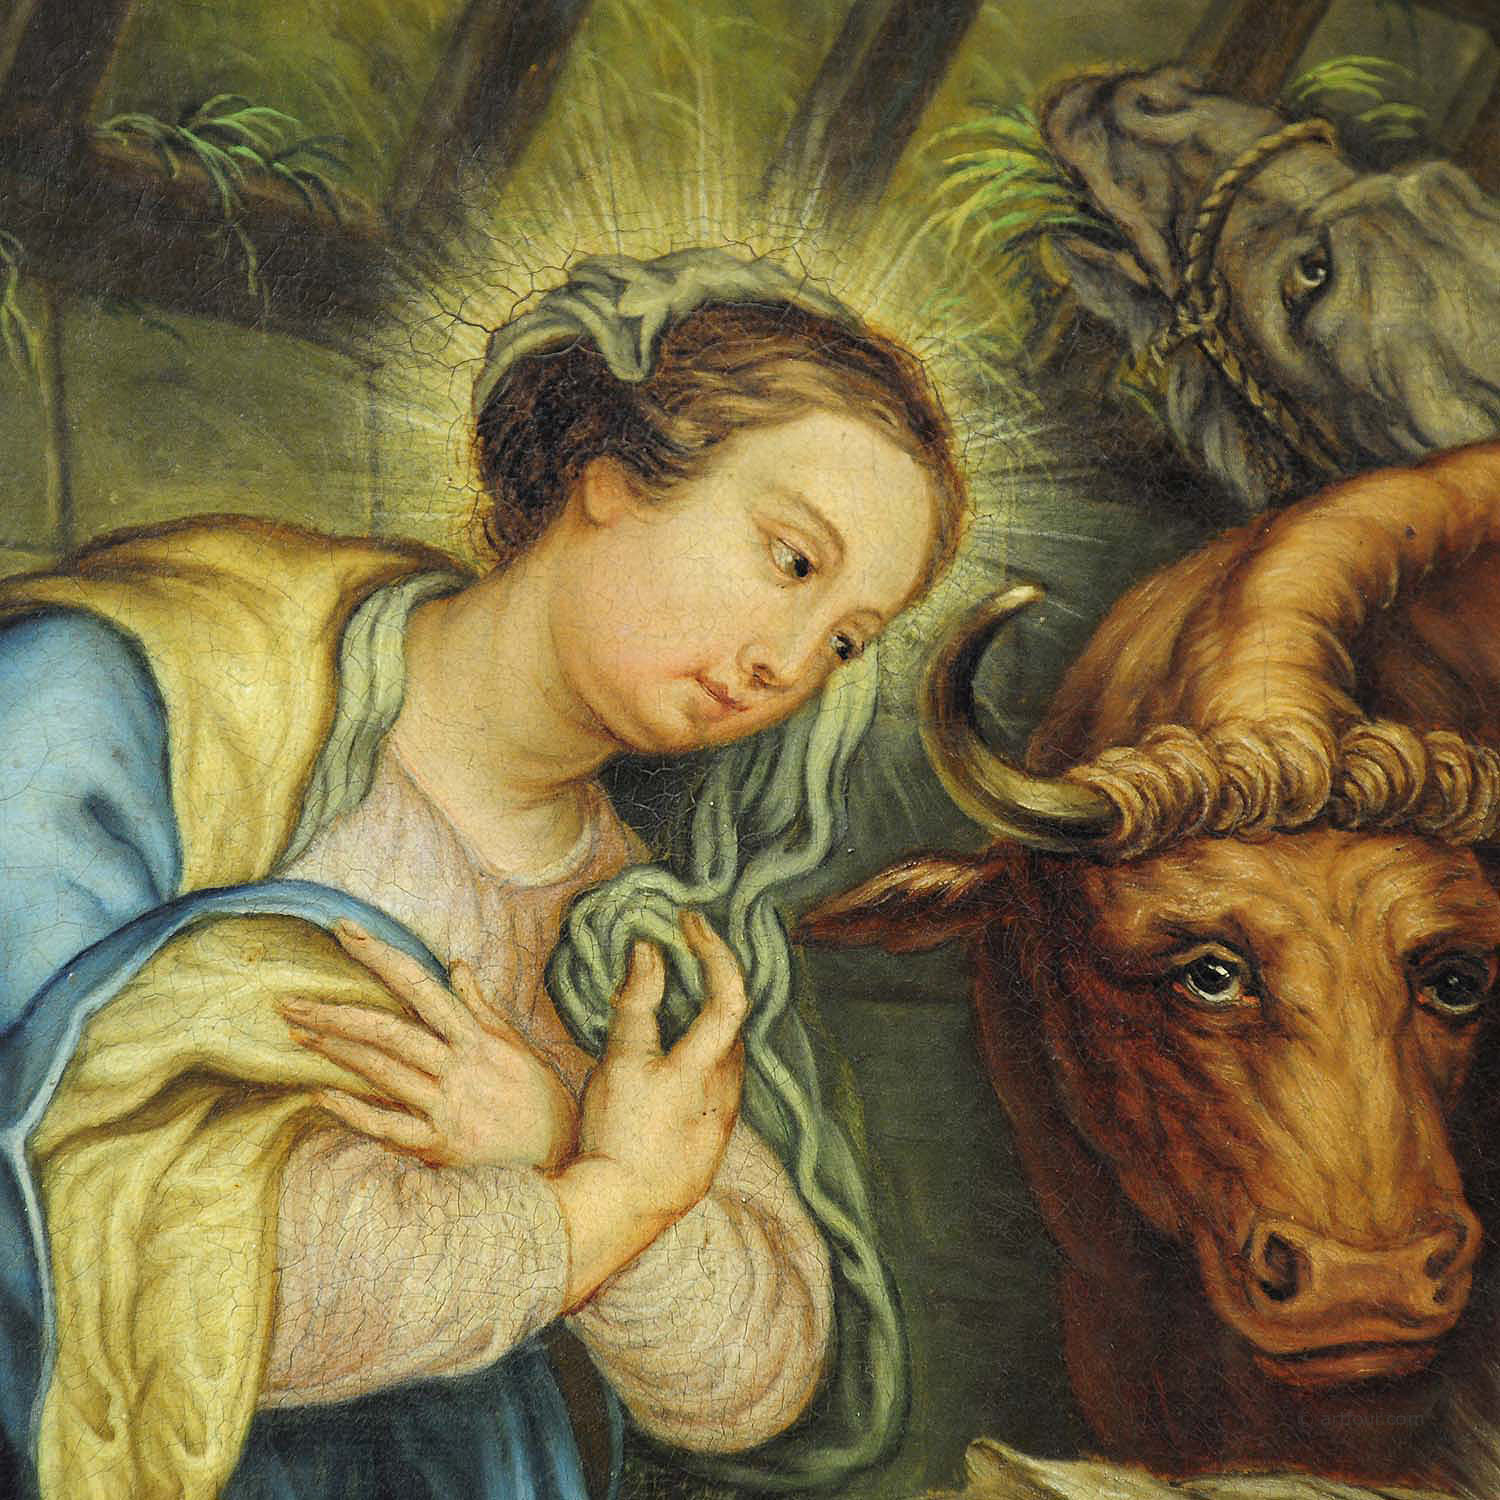 Mary and Joseph in the Barn of Bethlehem, Oil Painting on Canvas